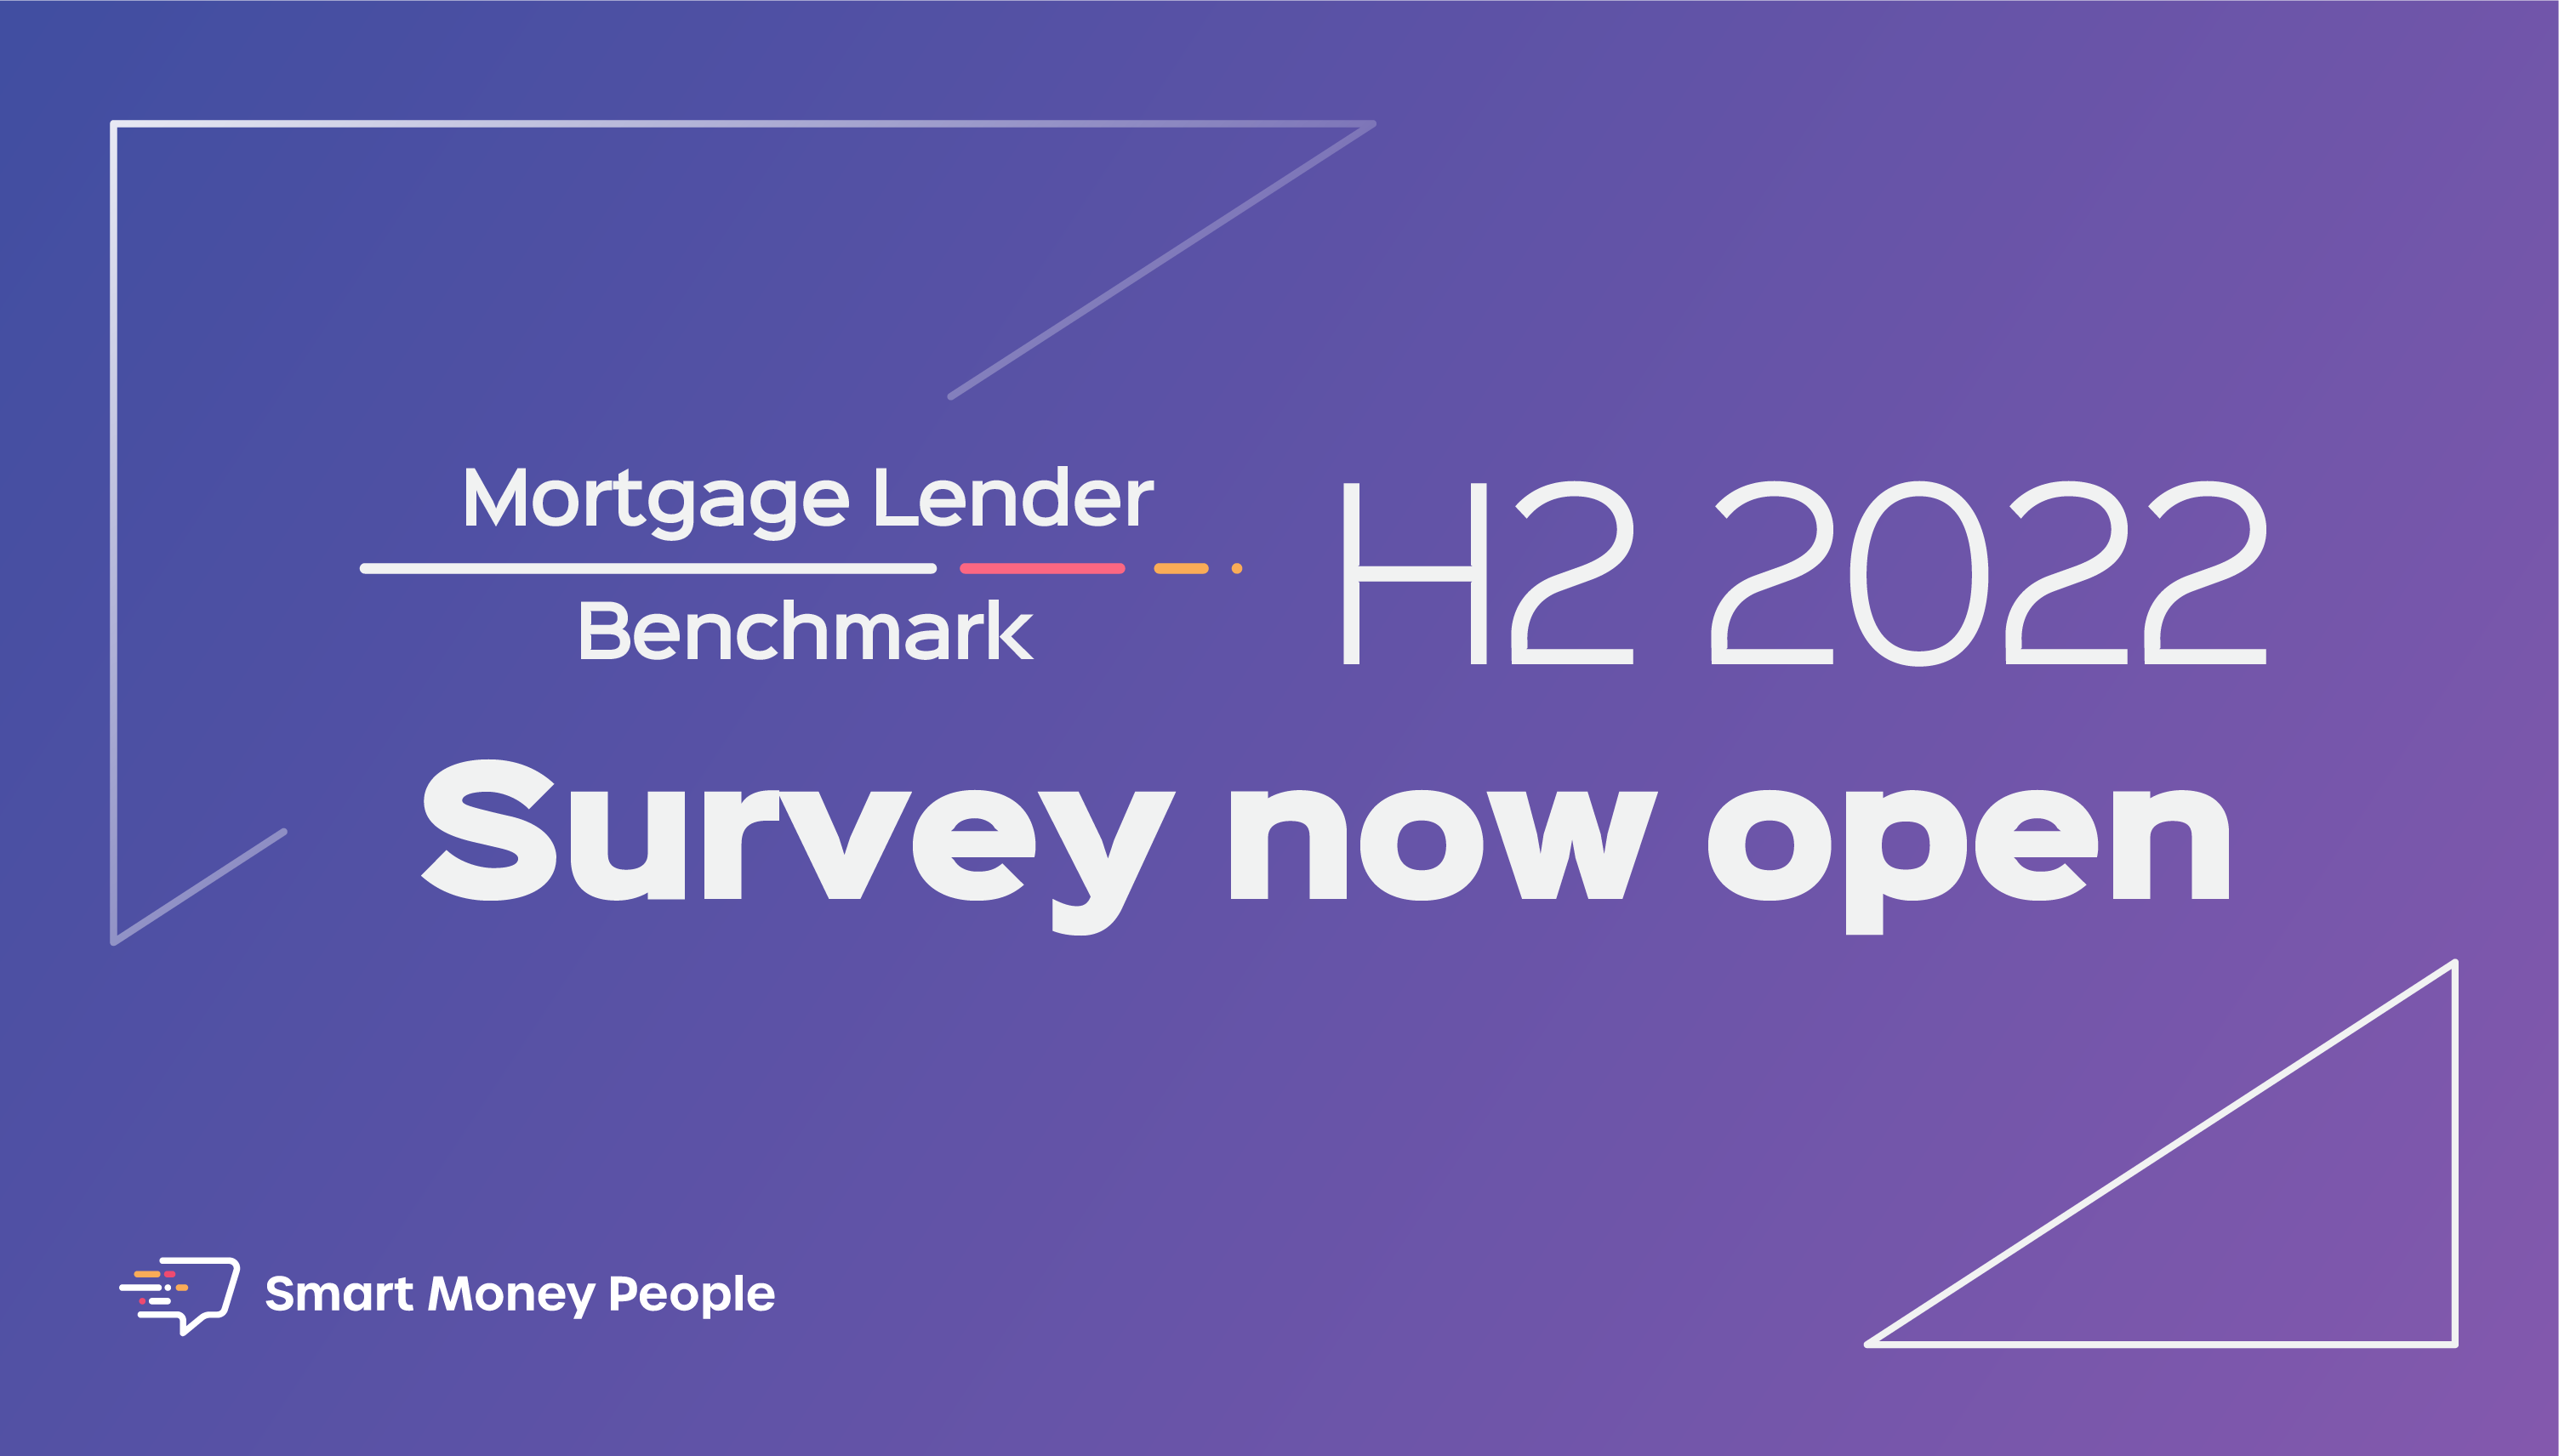 Our Mortgage Lender Benchmark H2 2022 is now open